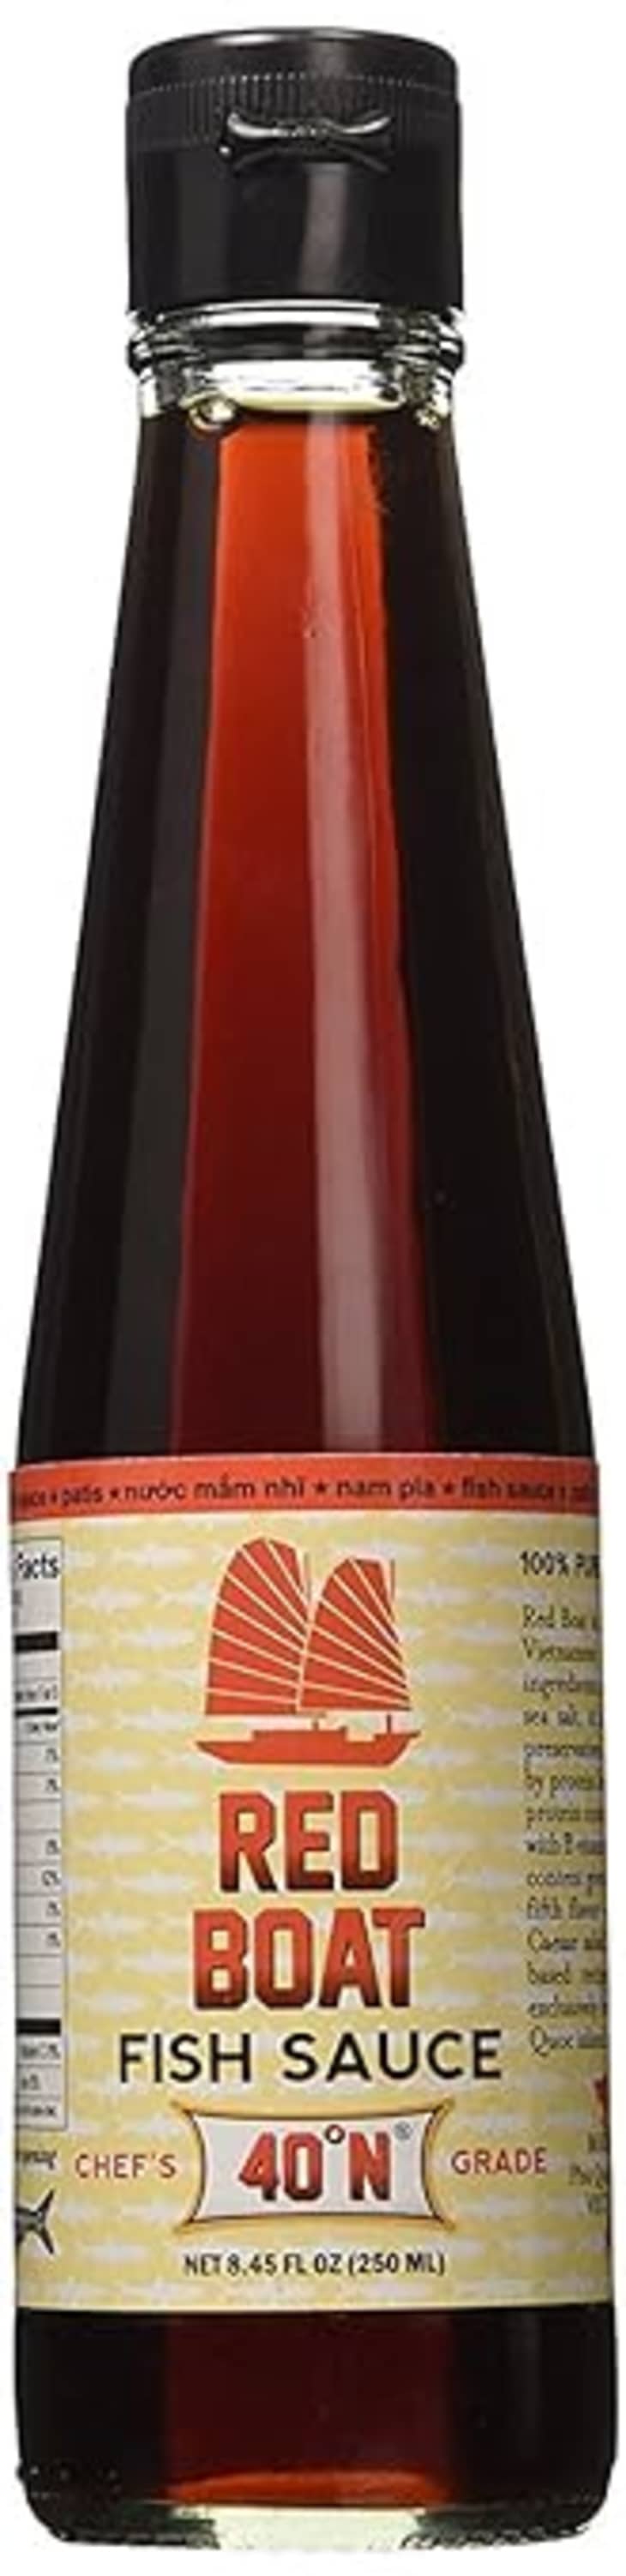 Product Image: Red Boat Vietnamese Extra Virgin Fish Sauce